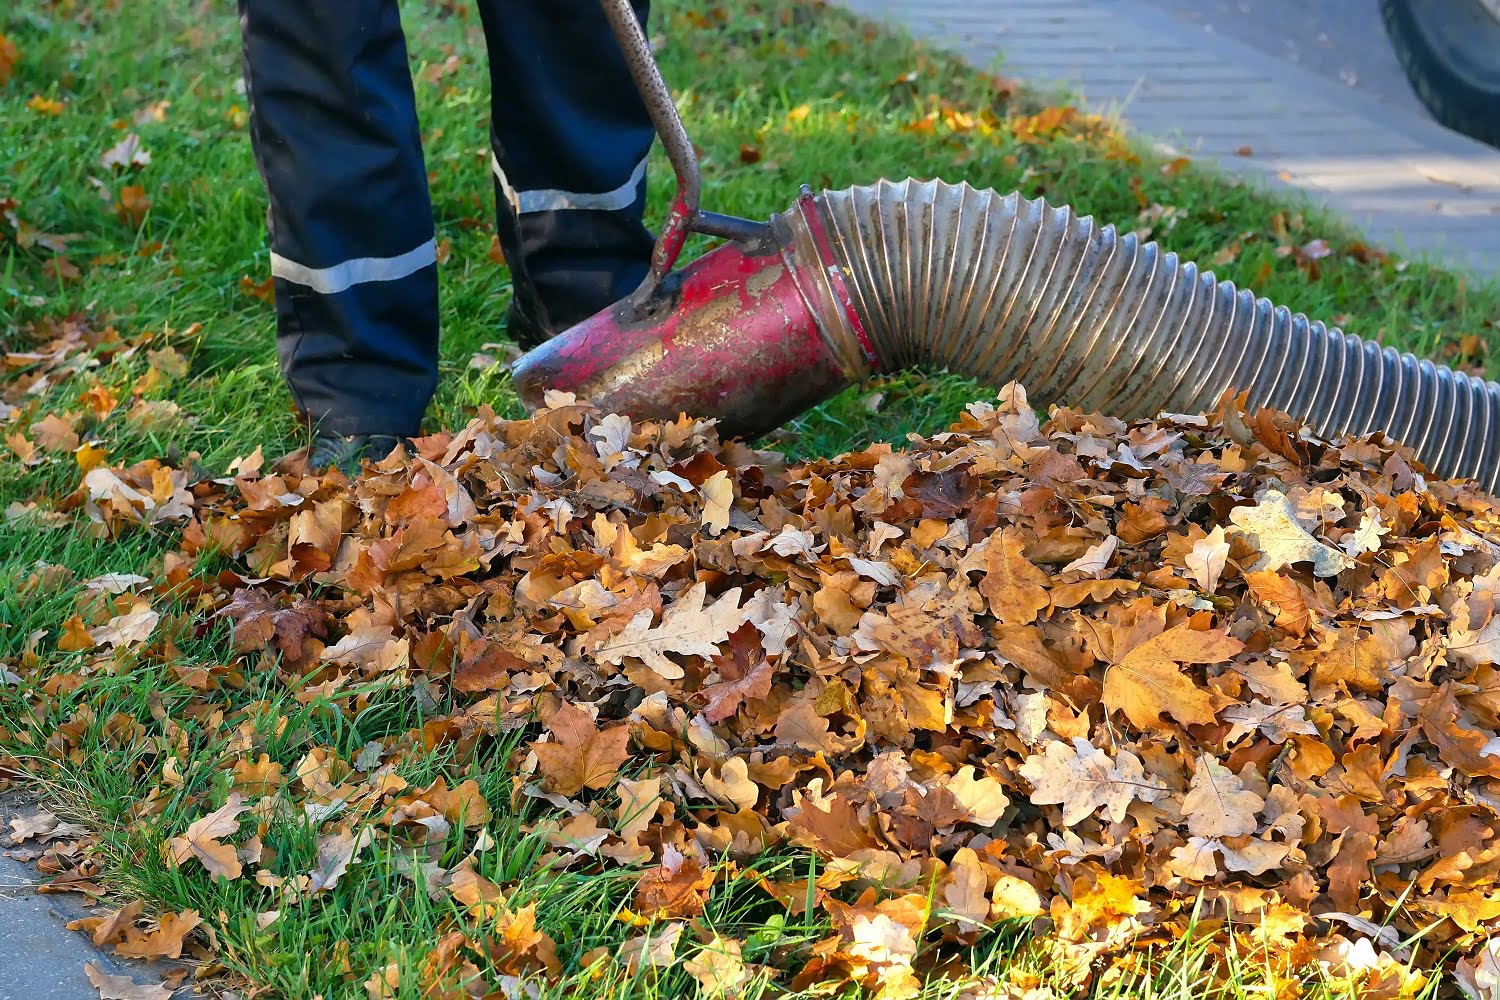 Worker clearing up the leaves using a leaf blower tool